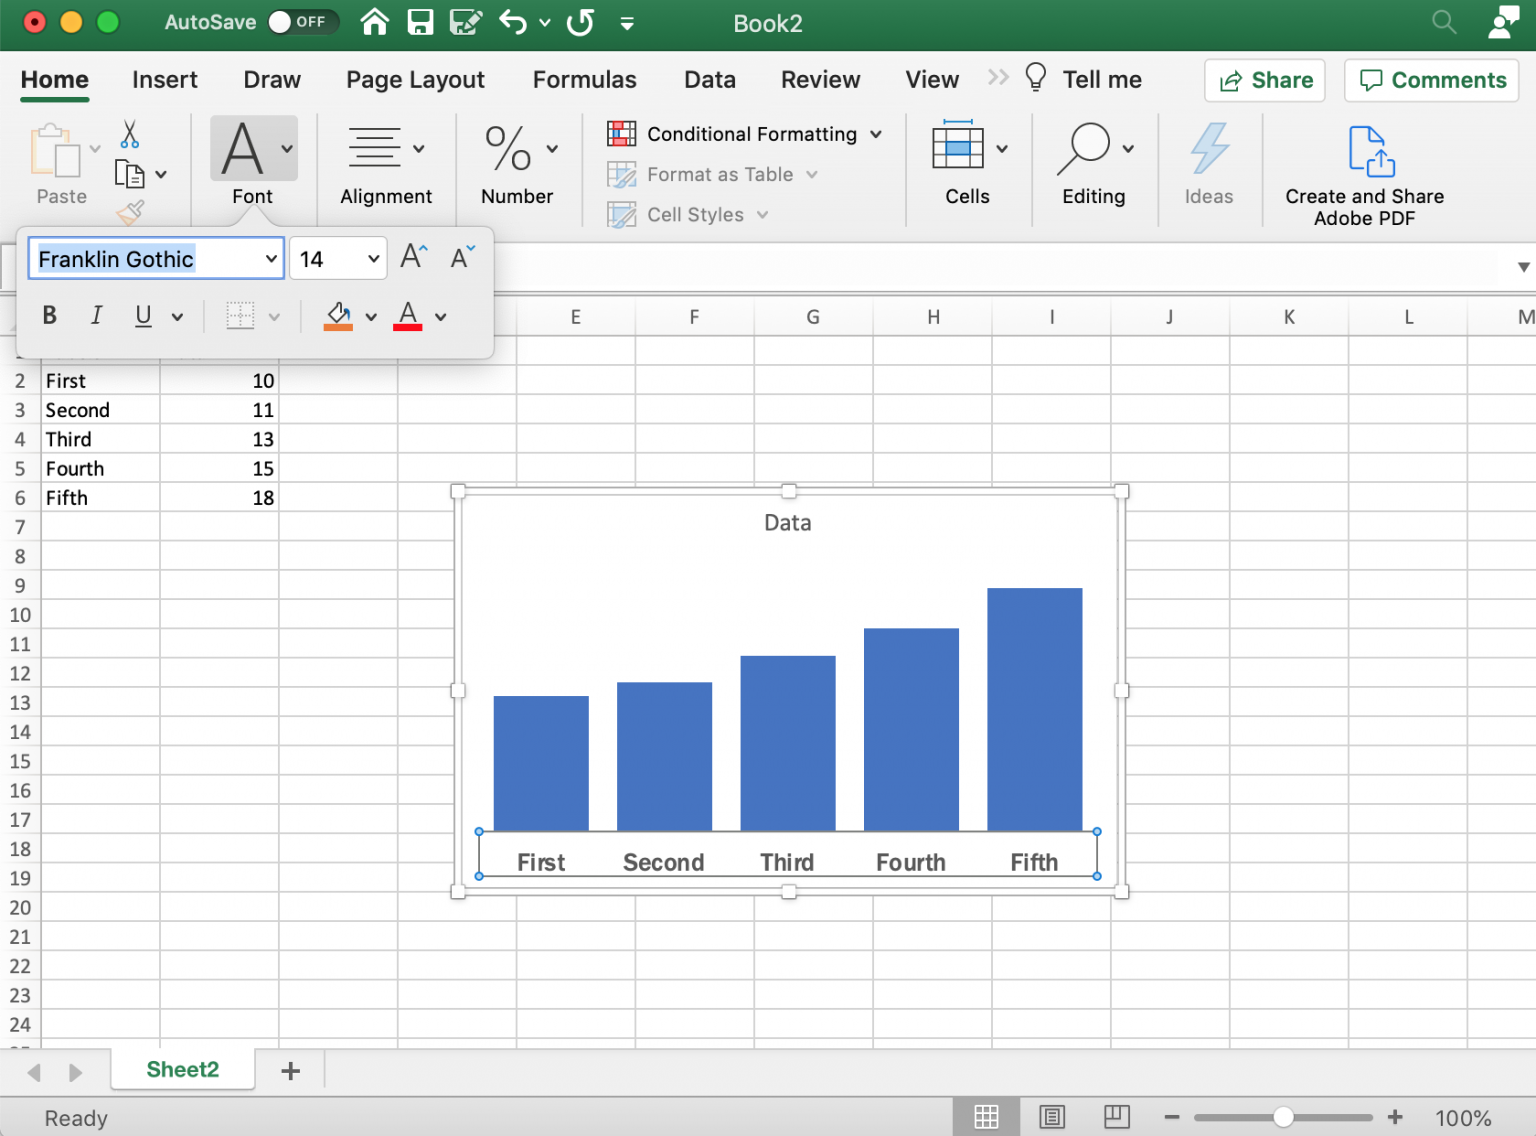 How to Create Bar Charts in Excel